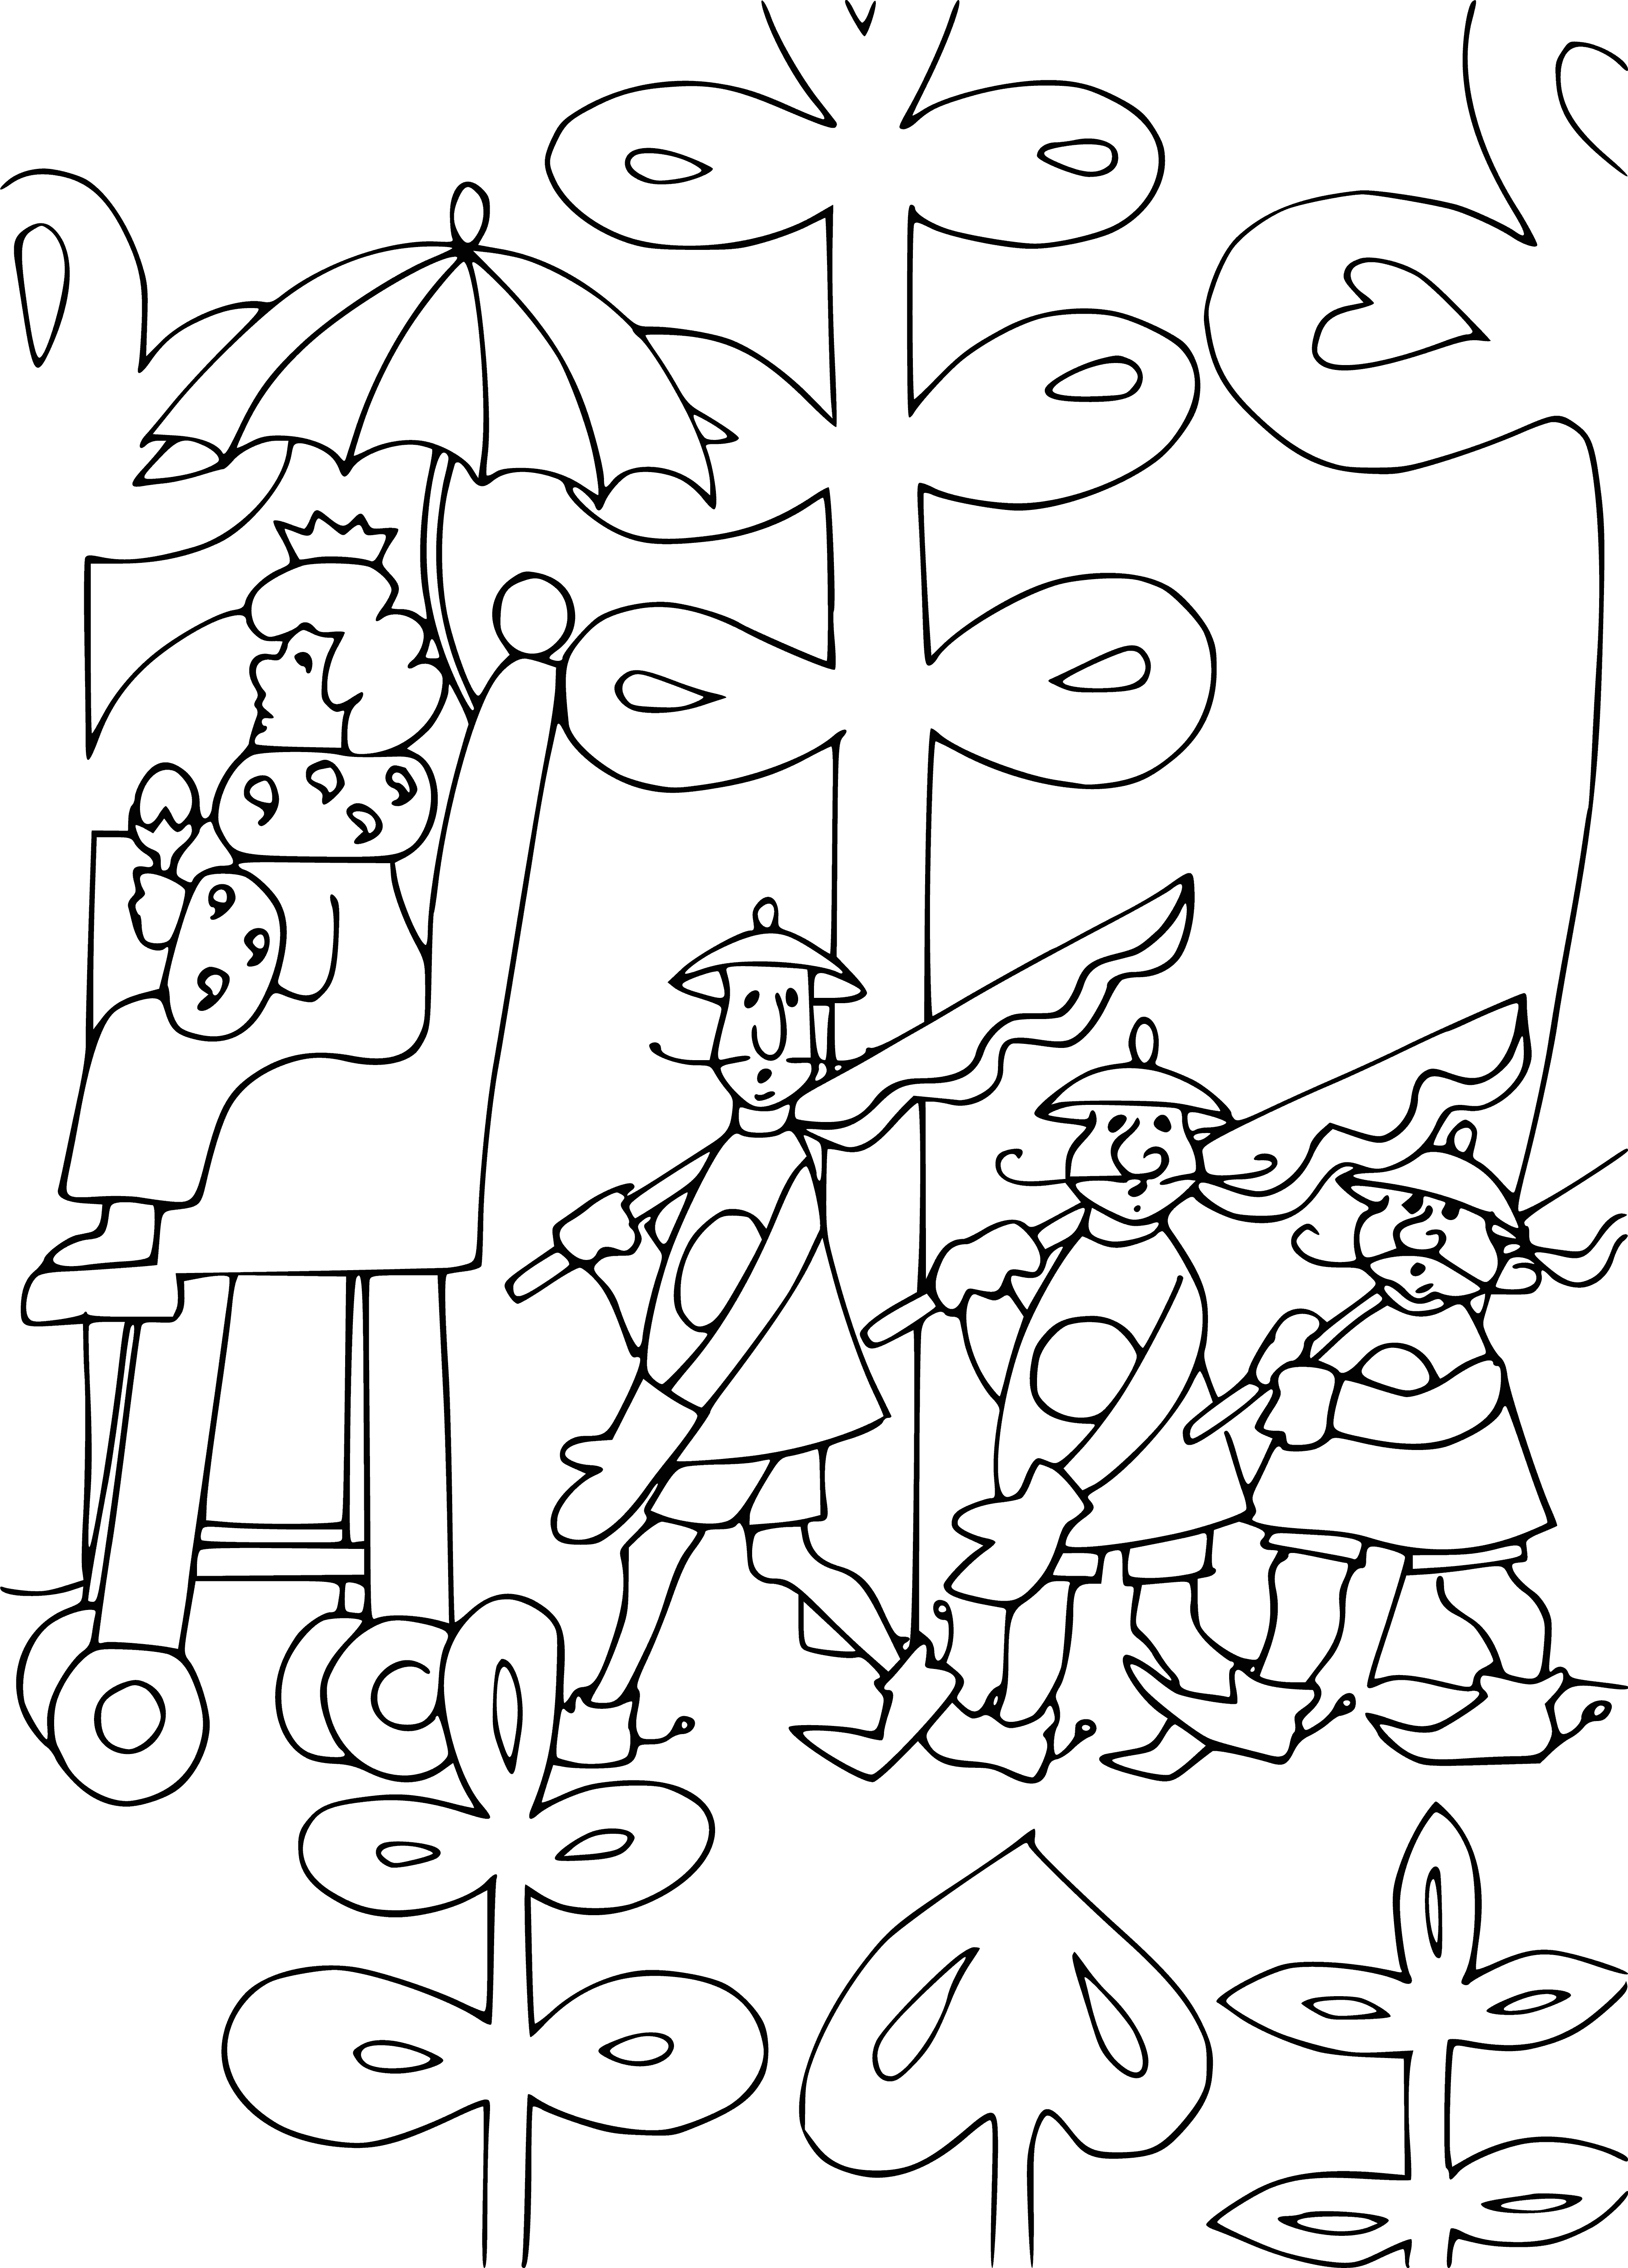 coloring page: Four animals, a KING and his guards looking unhappy, and a village in the background.